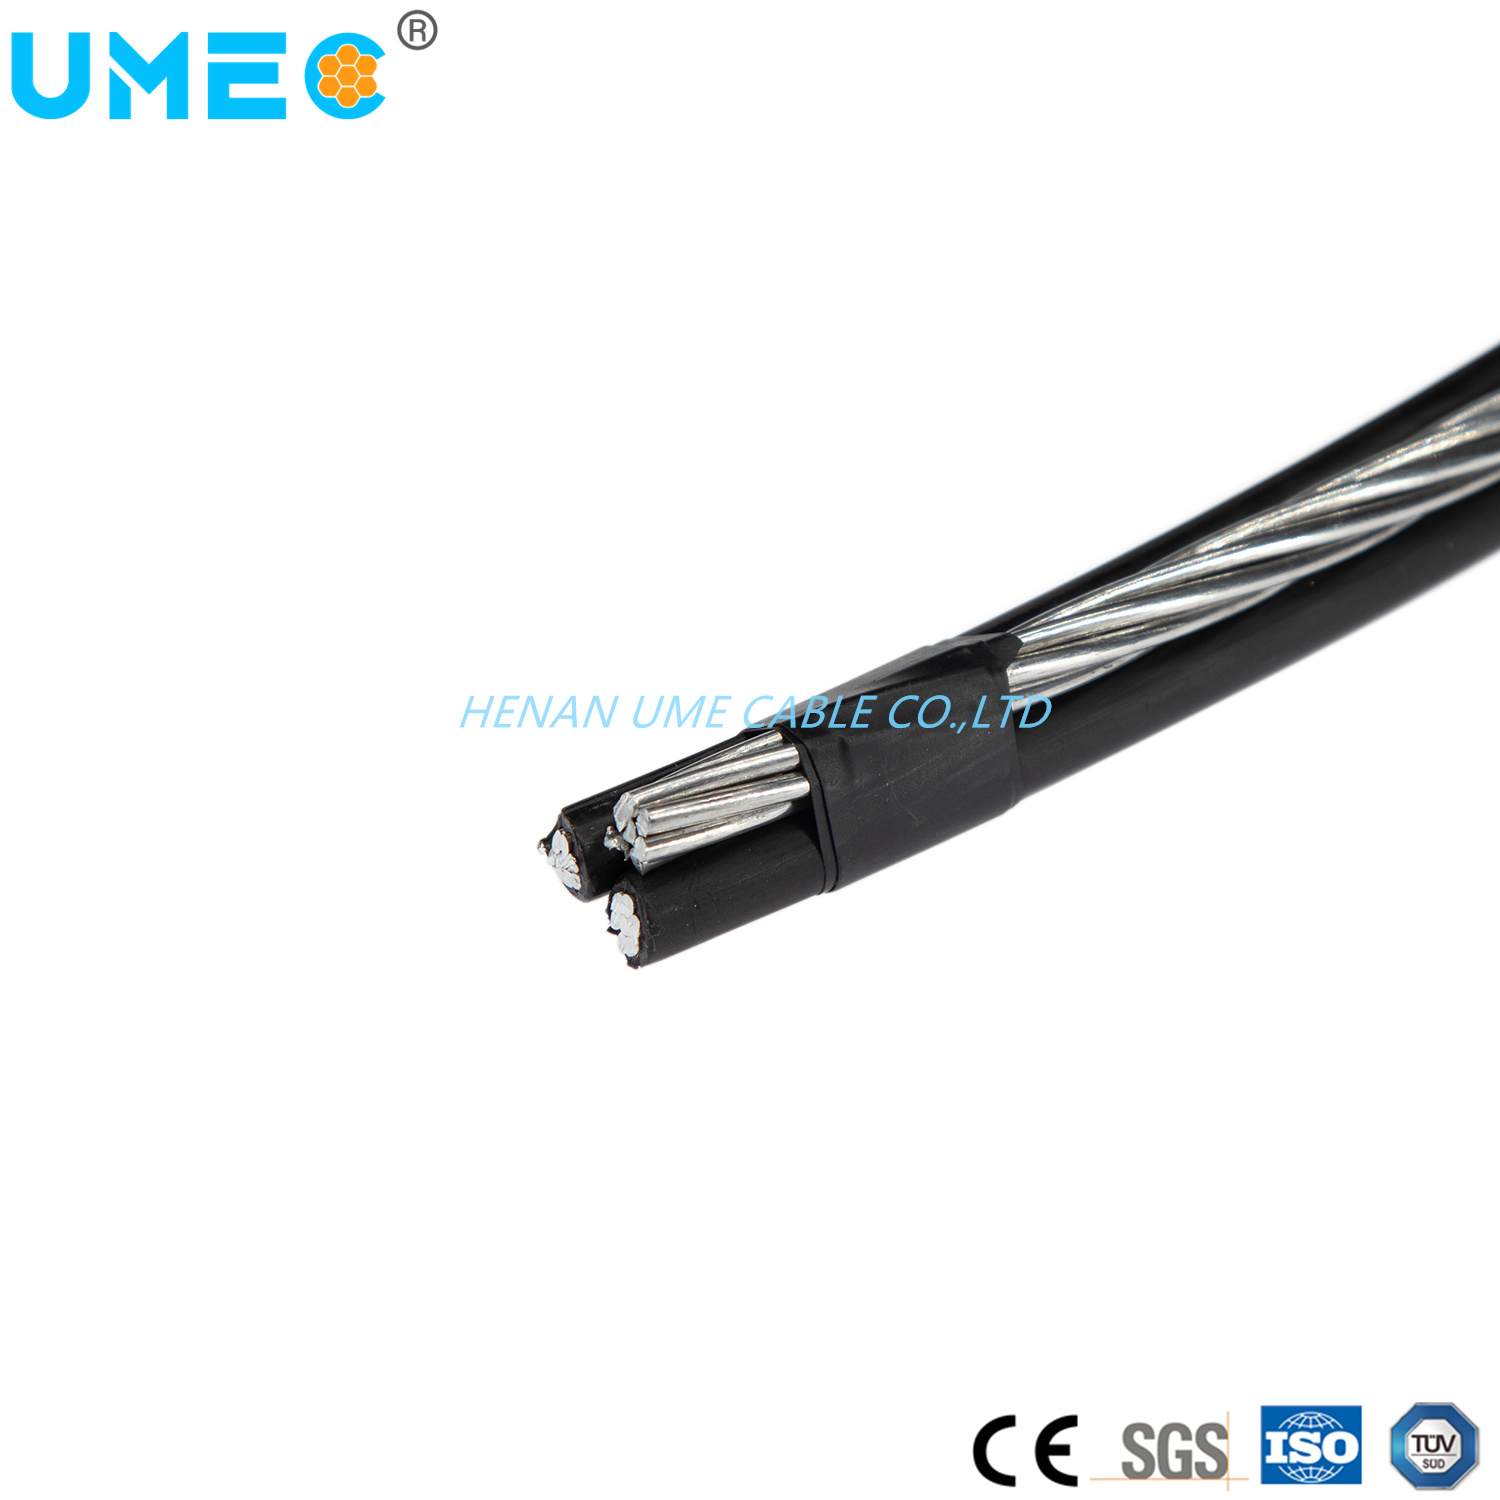 Aerial Bundled Cable Aluminum Conductor Concentric-Lay-Stranded ABC Cable Triplex Service Drop Cable